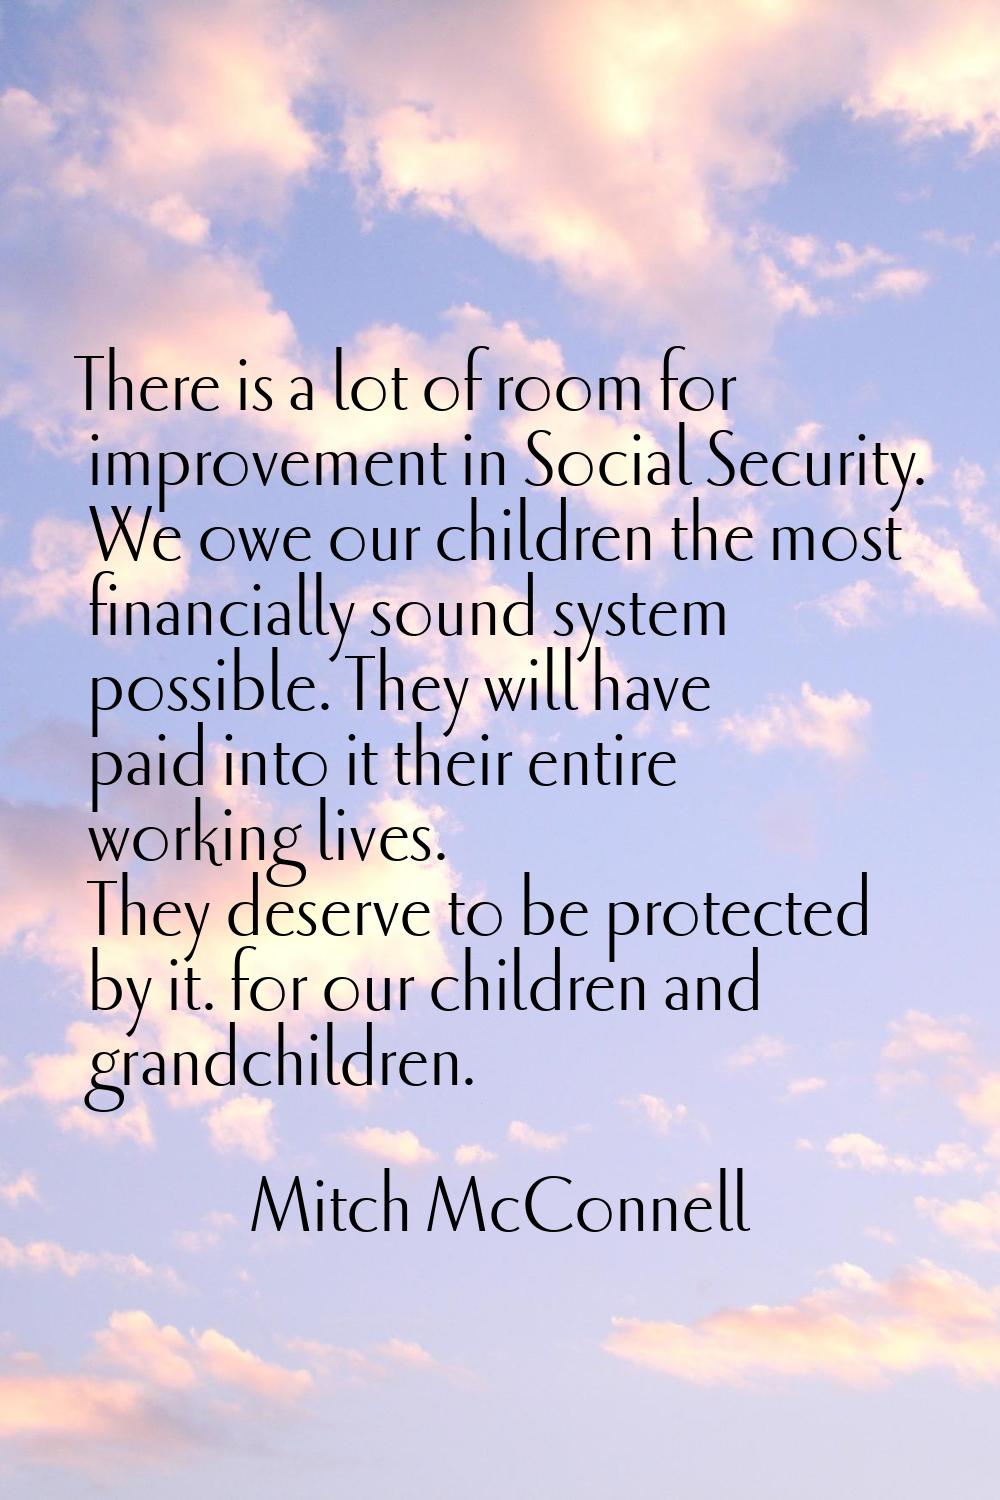 There is a lot of room for improvement in Social Security. We owe our children the most financially